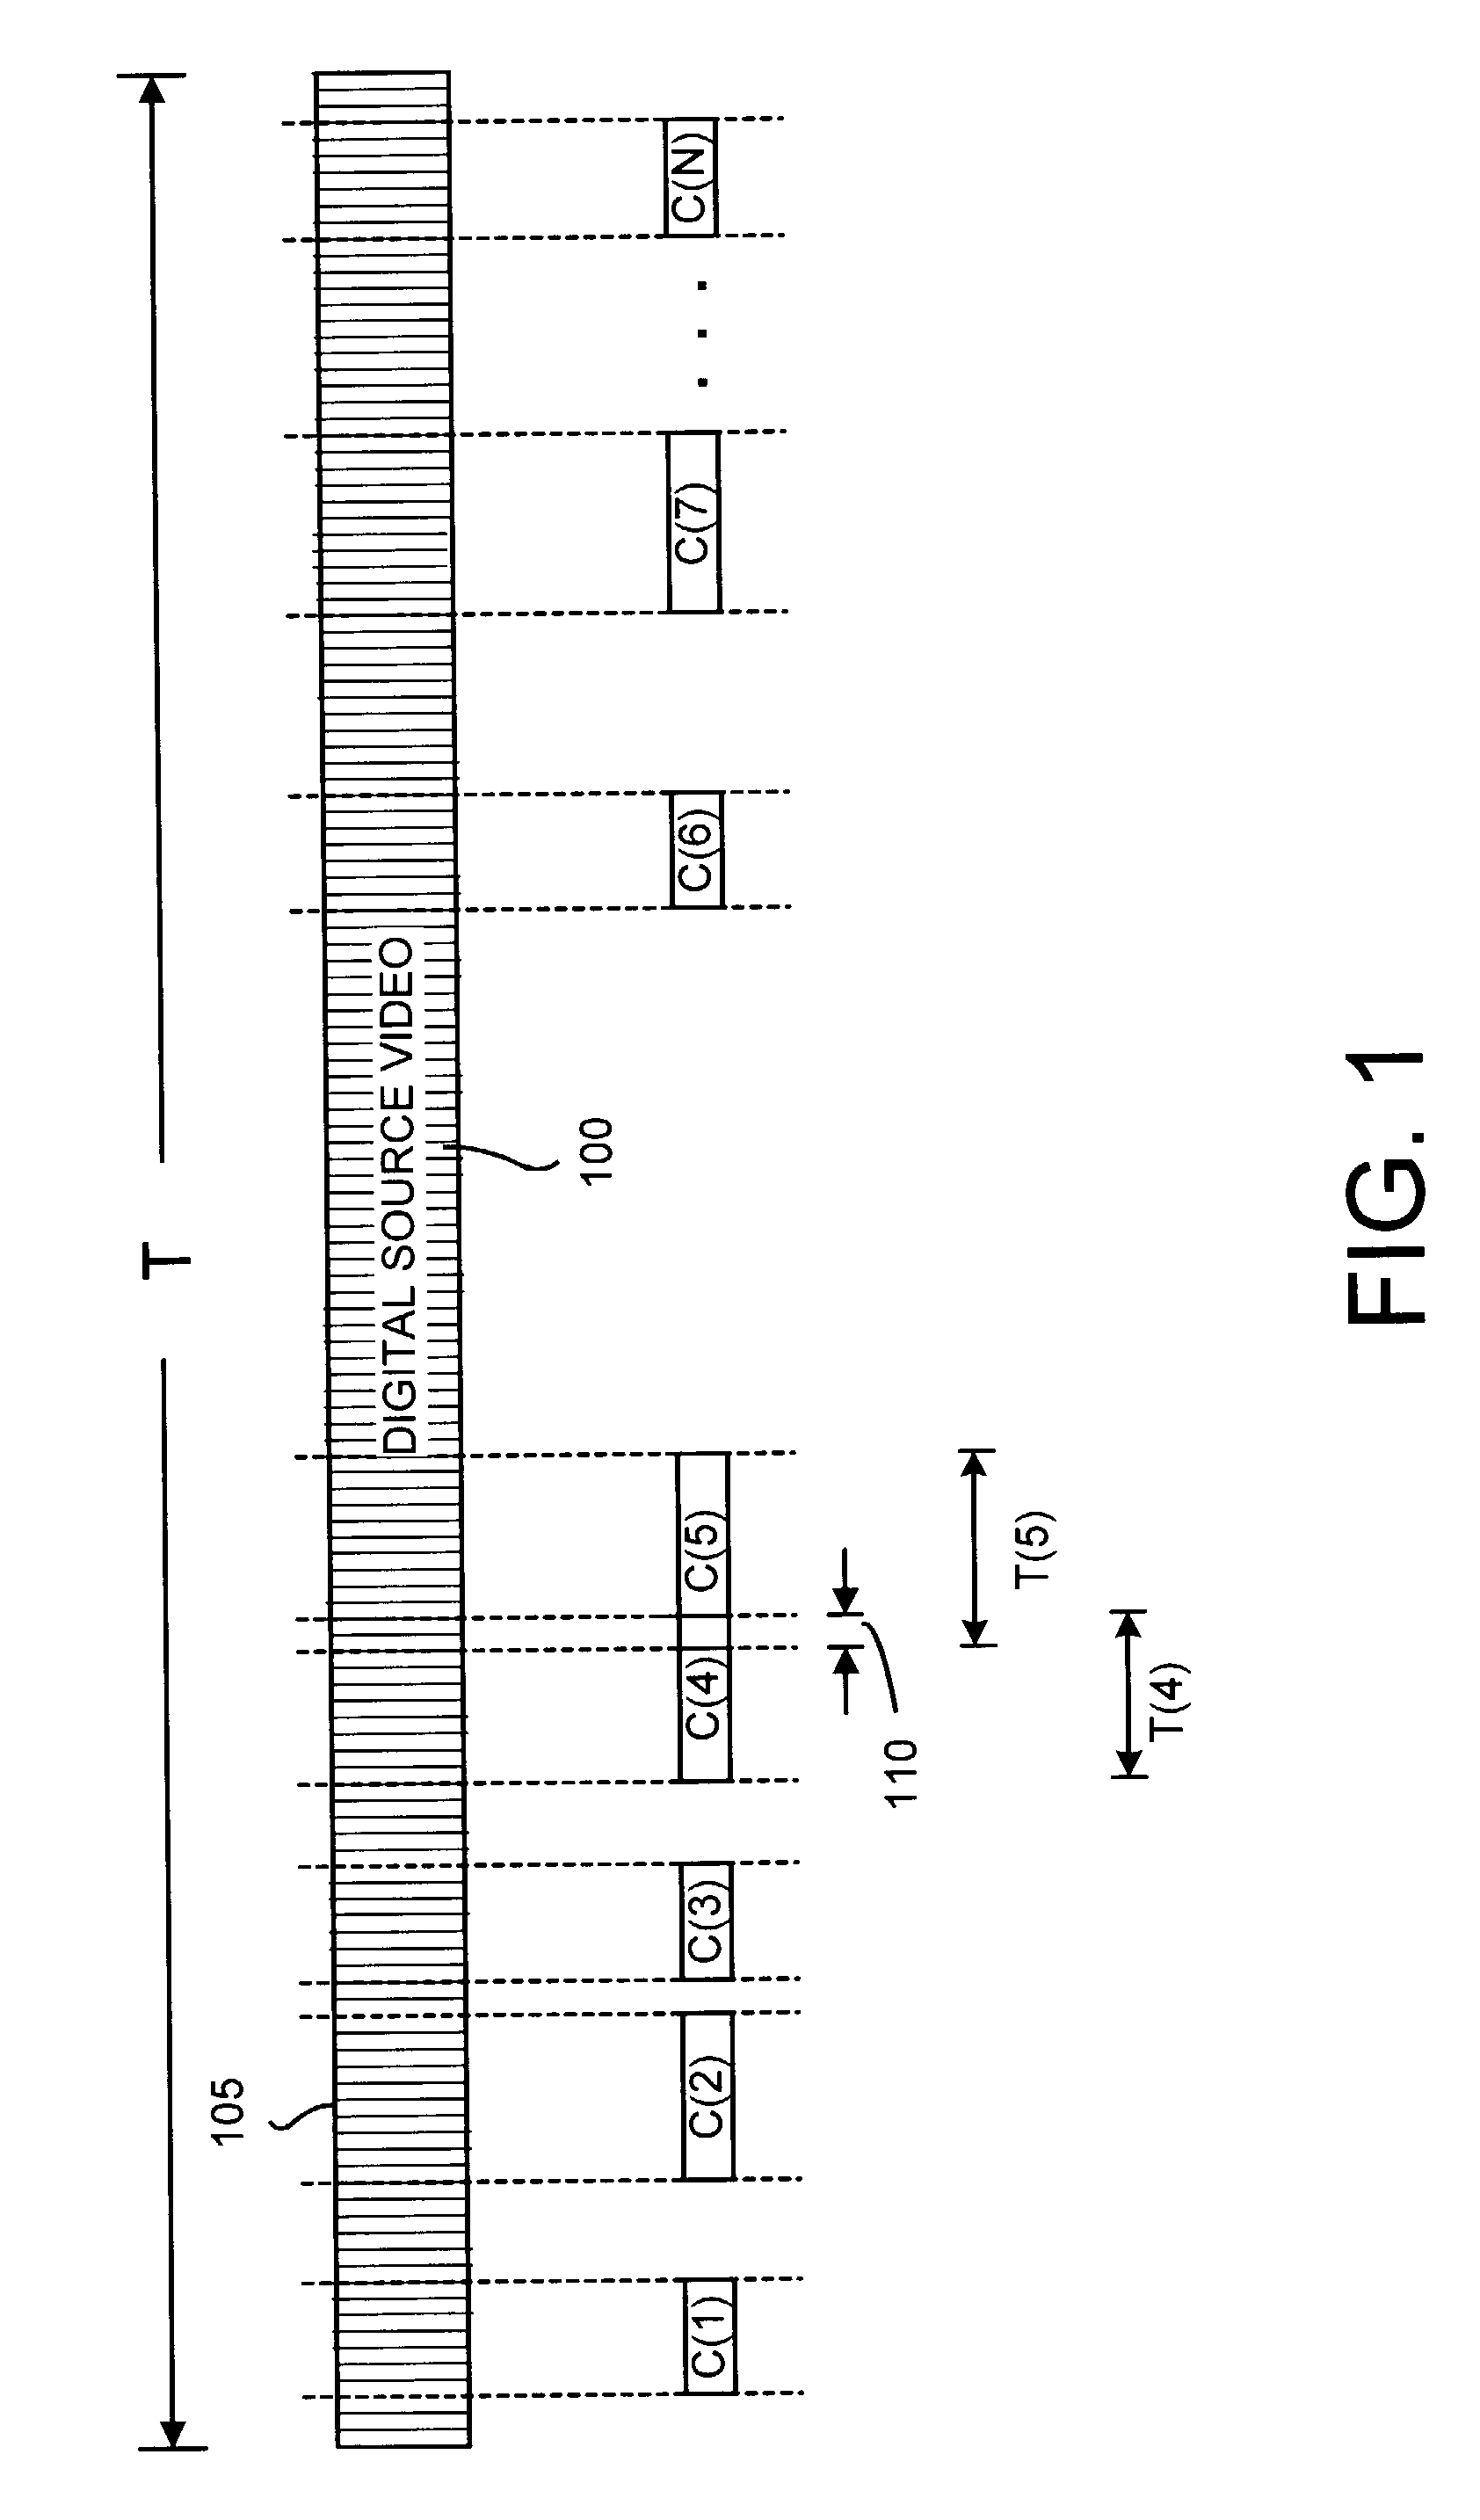 System and method for automatically generating video cliplets from digital video